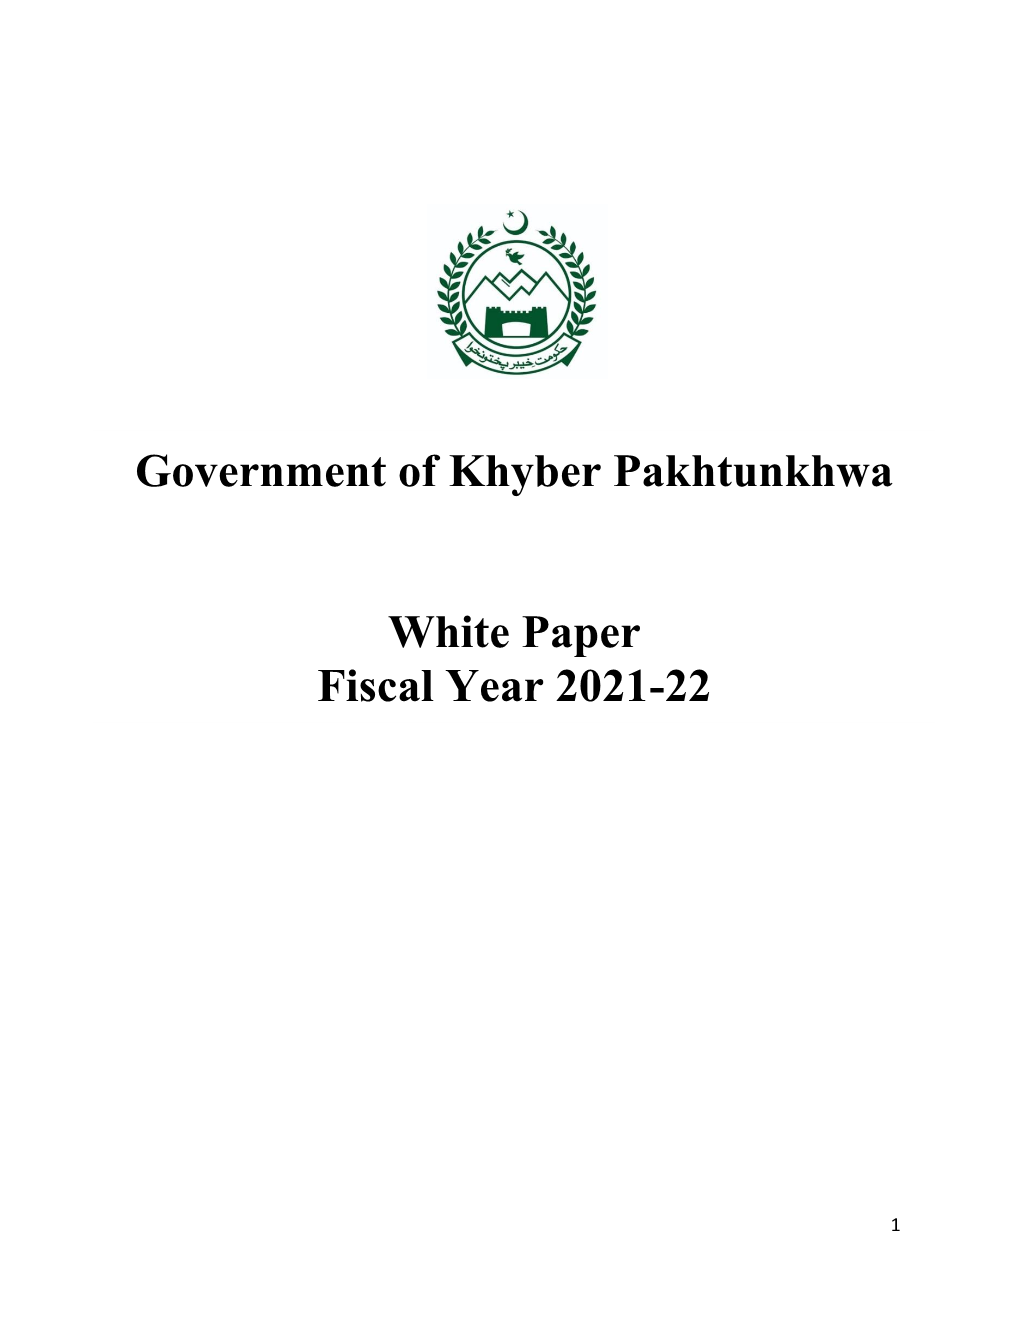 Government of Khyber Pakhtunkhwa White Paper Fiscal Year 2021-22